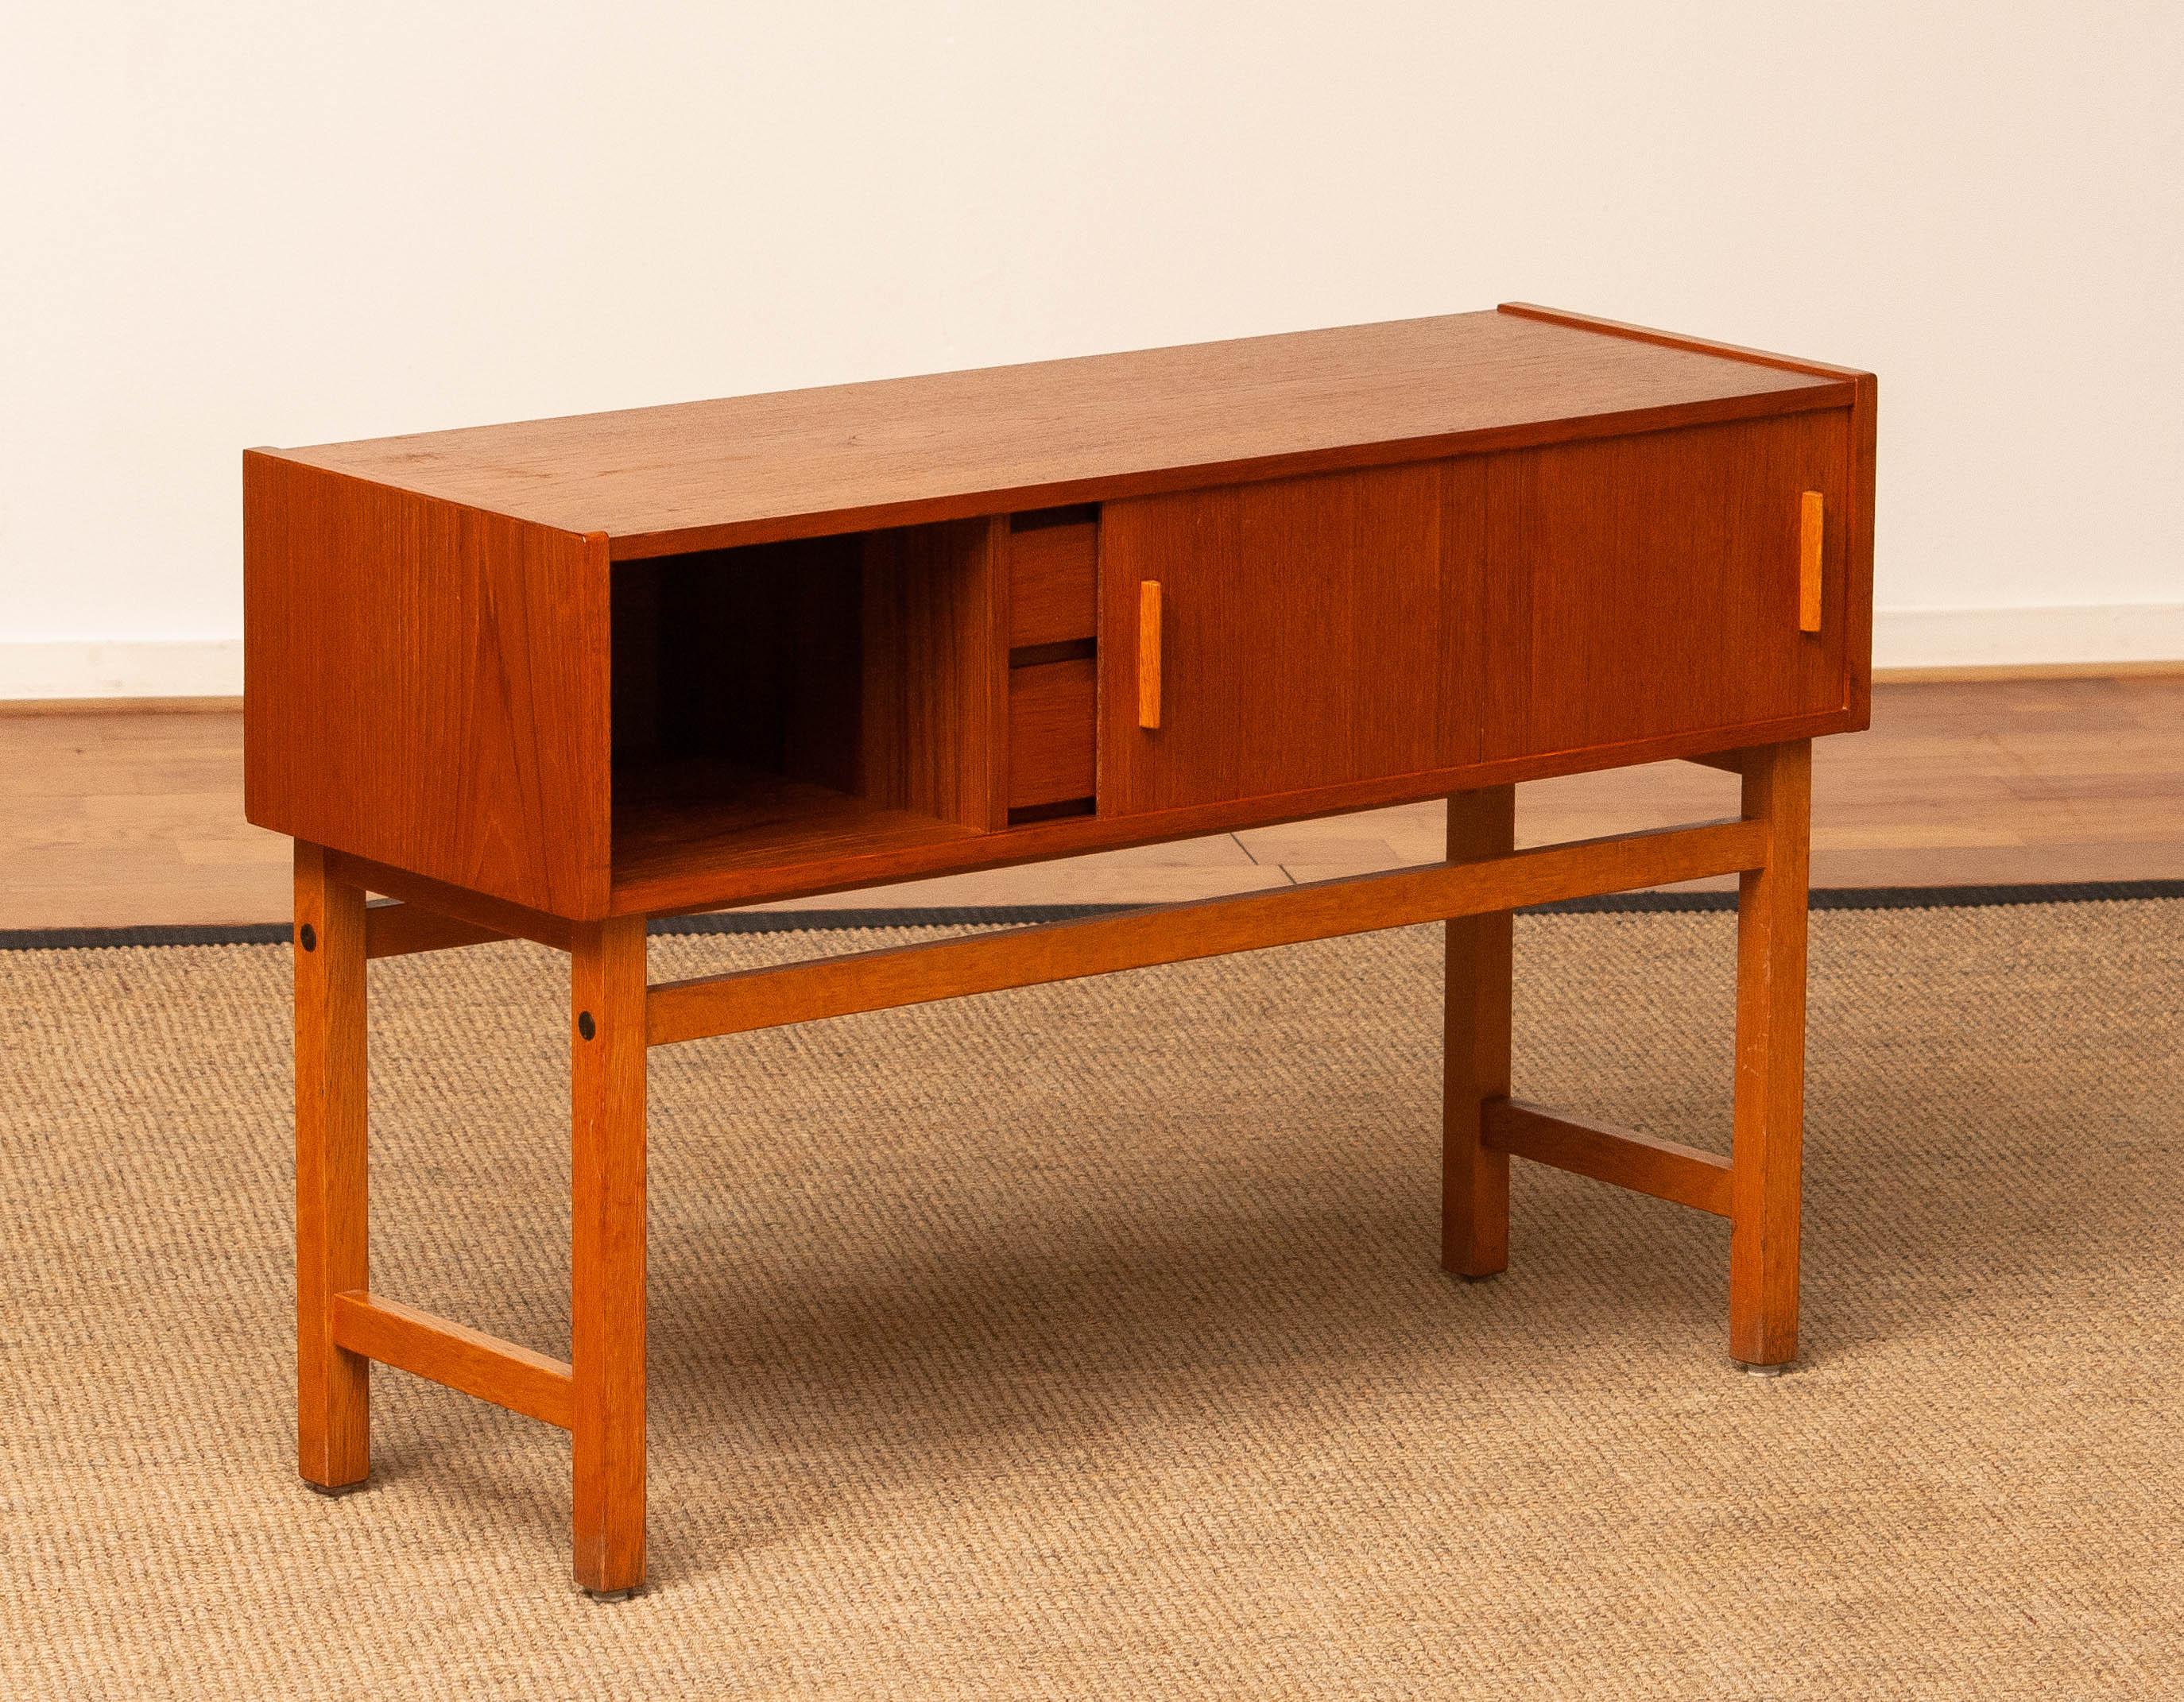 Mid-20th Century 1960s Teak Cabinet / Credenzas / Console With Drawers And Sliding Doors. Sweden. For Sale